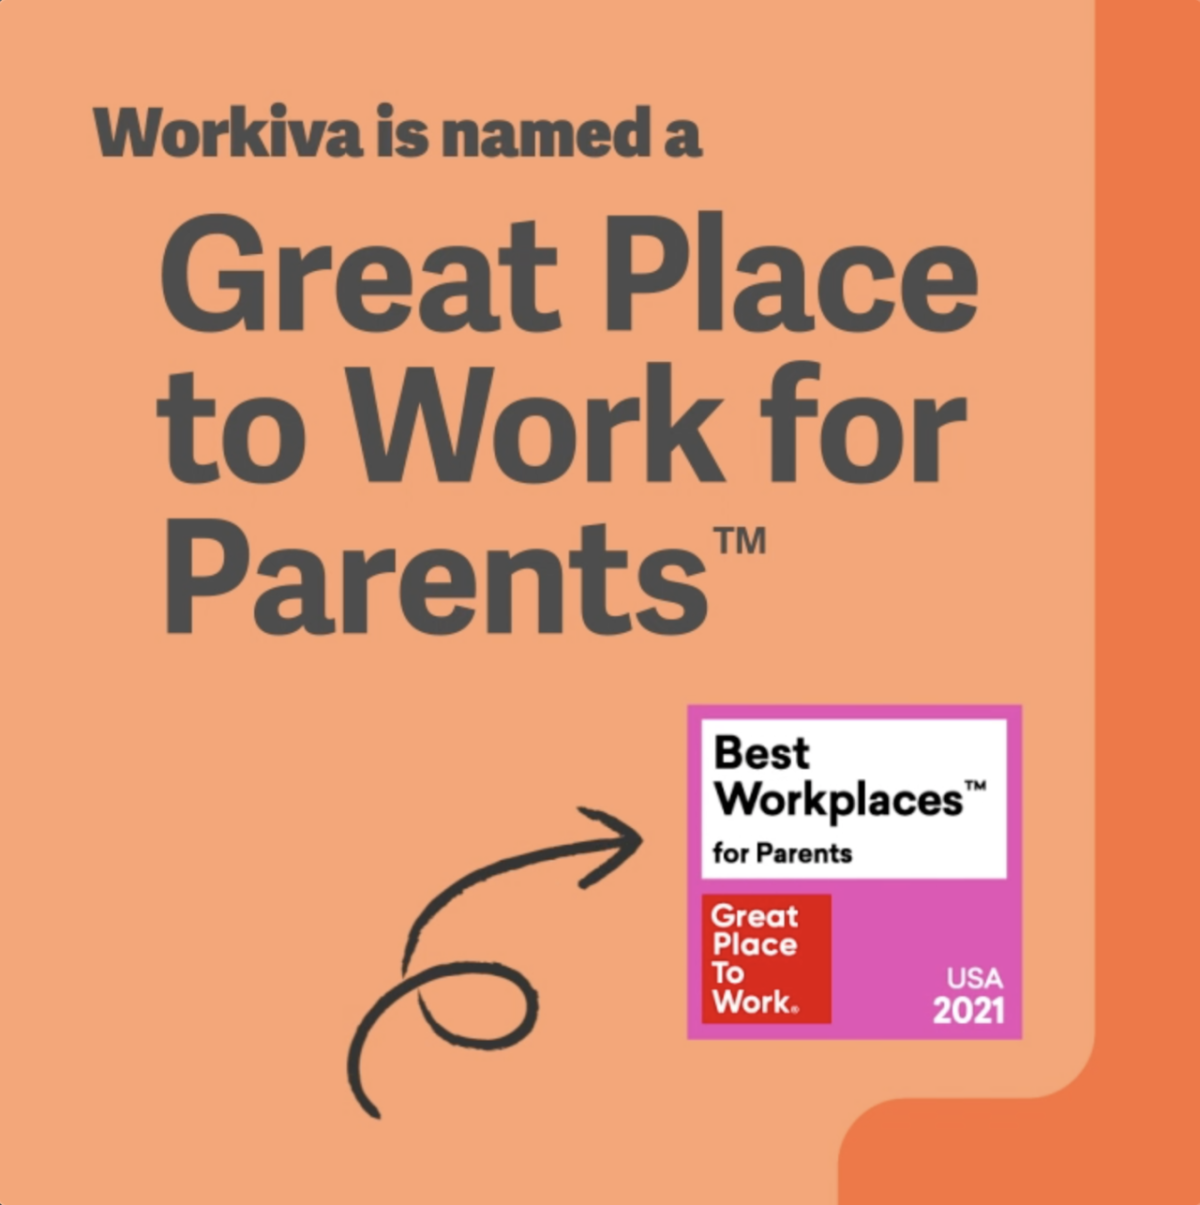 Workiva is named a Great Place to Work for Parents award logo